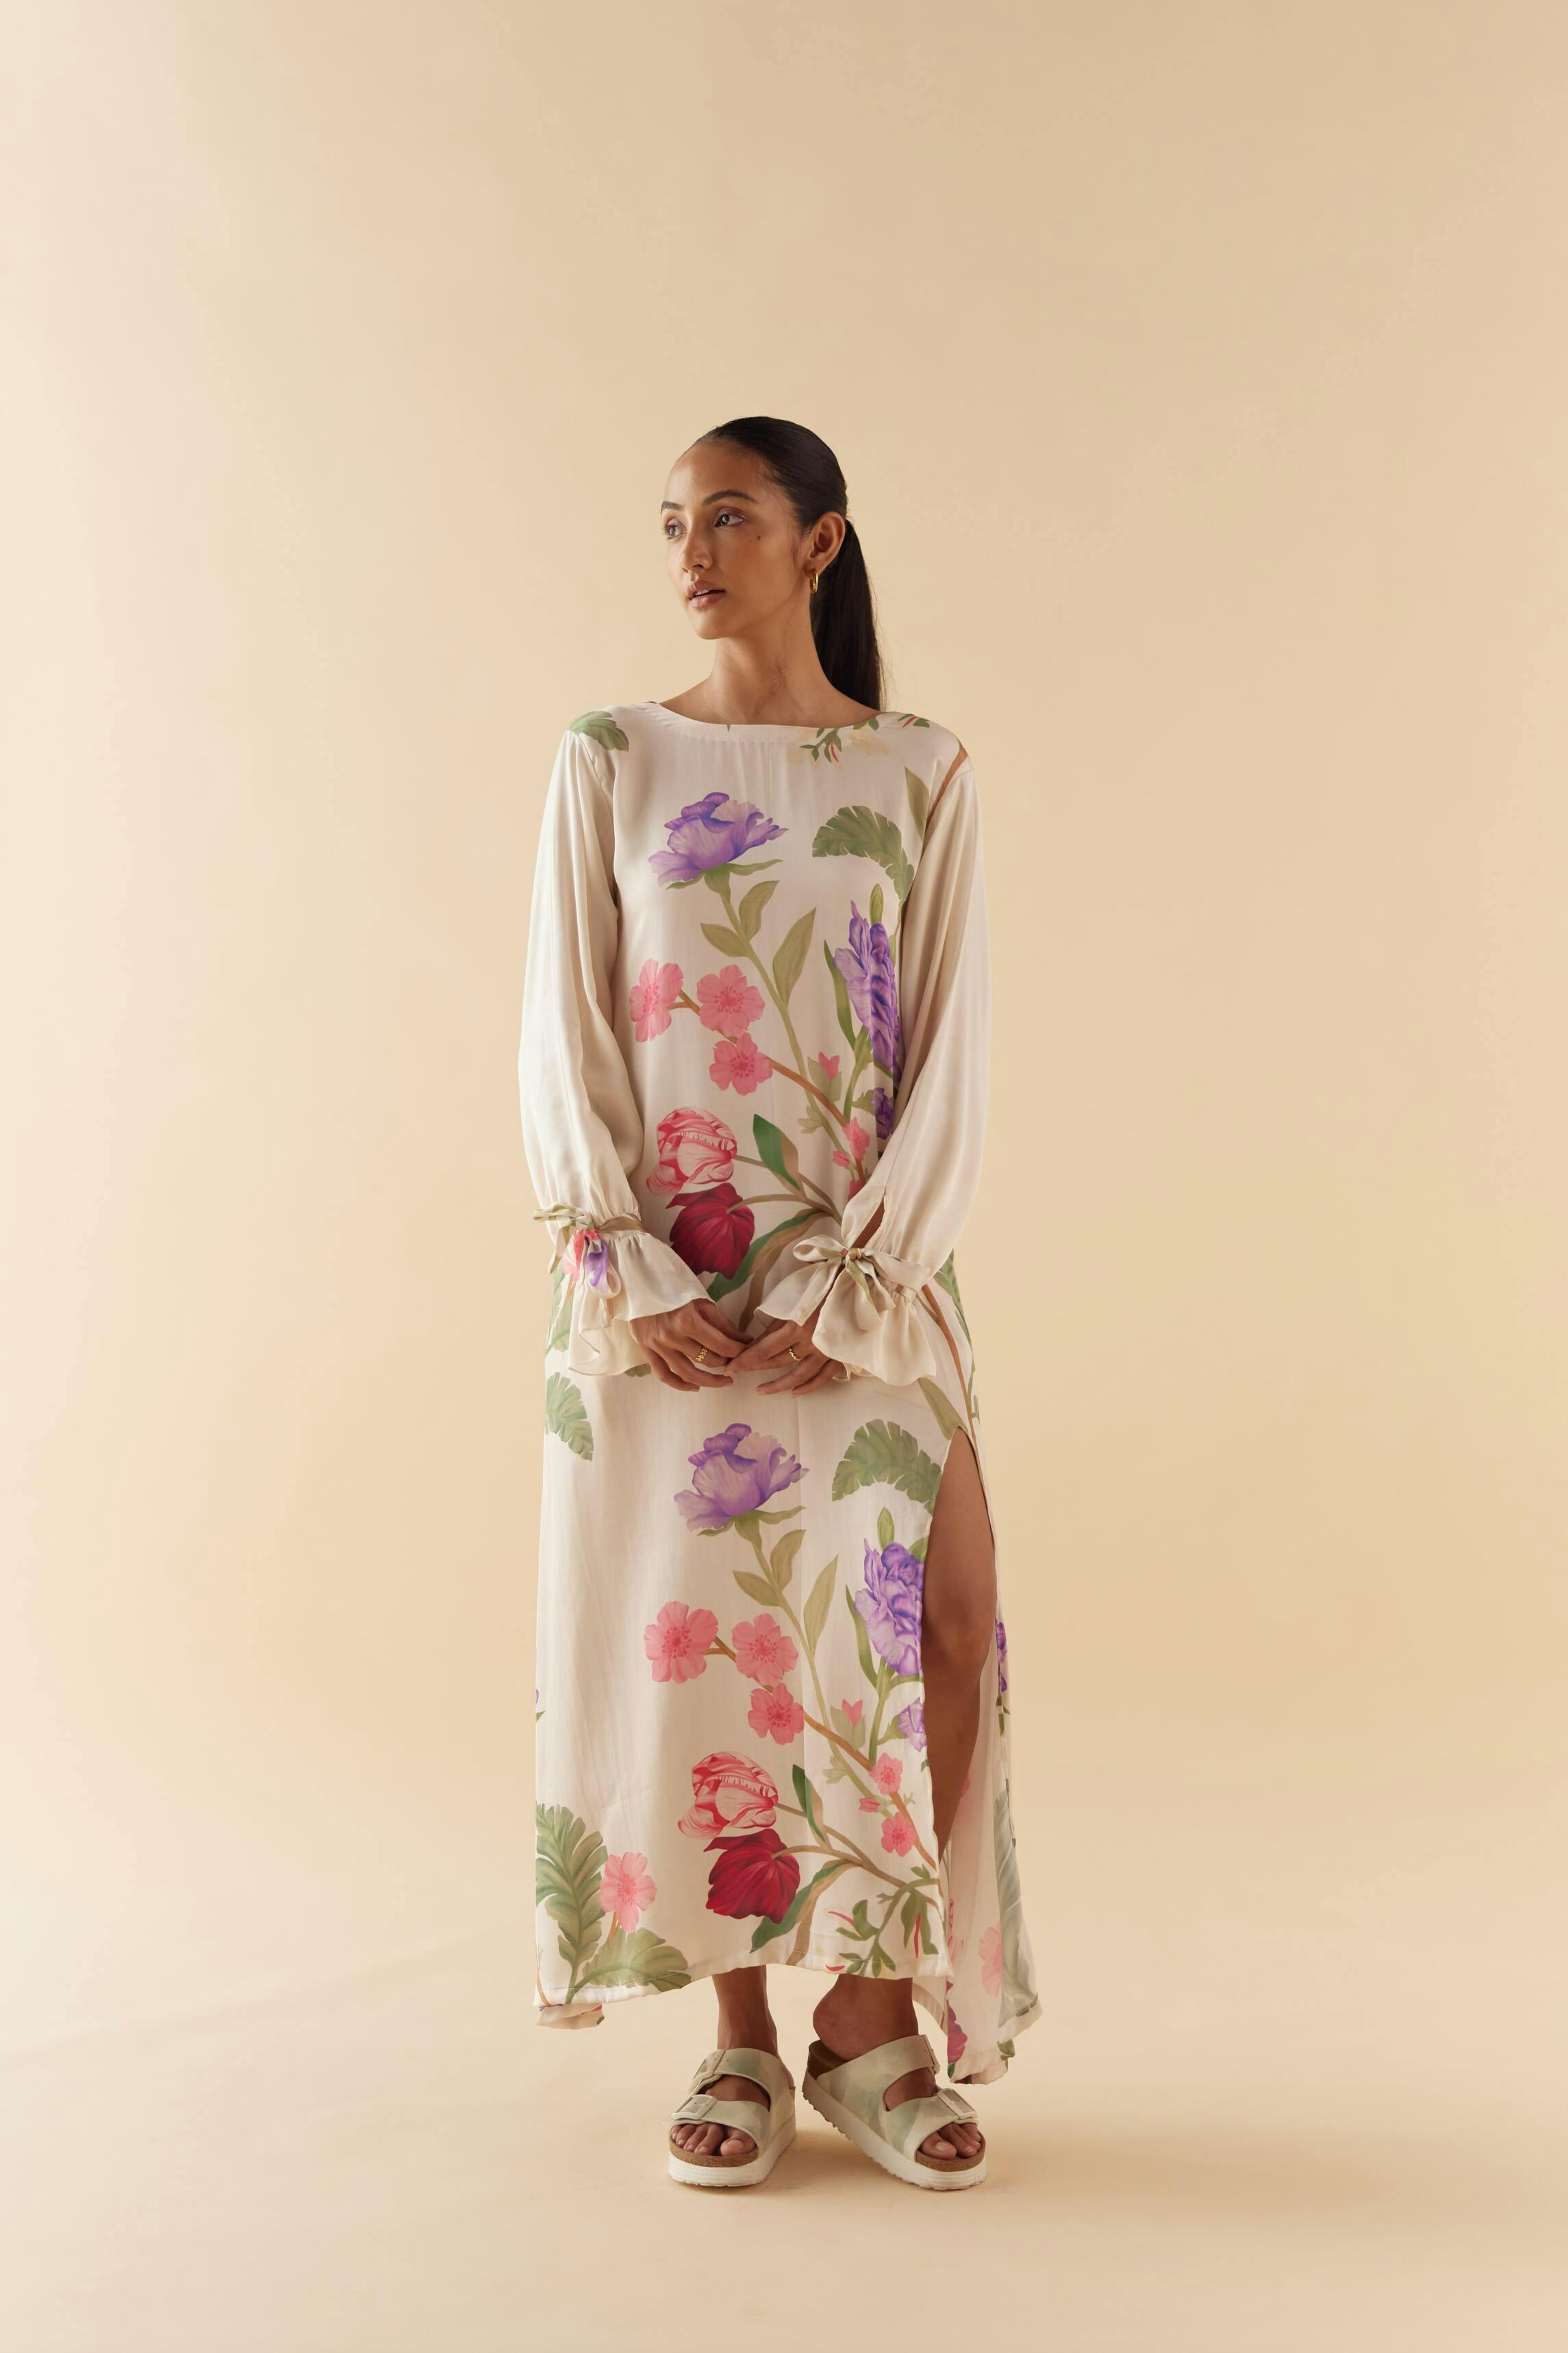 Floral Dream Lounge Dress, a product by Sleeplove